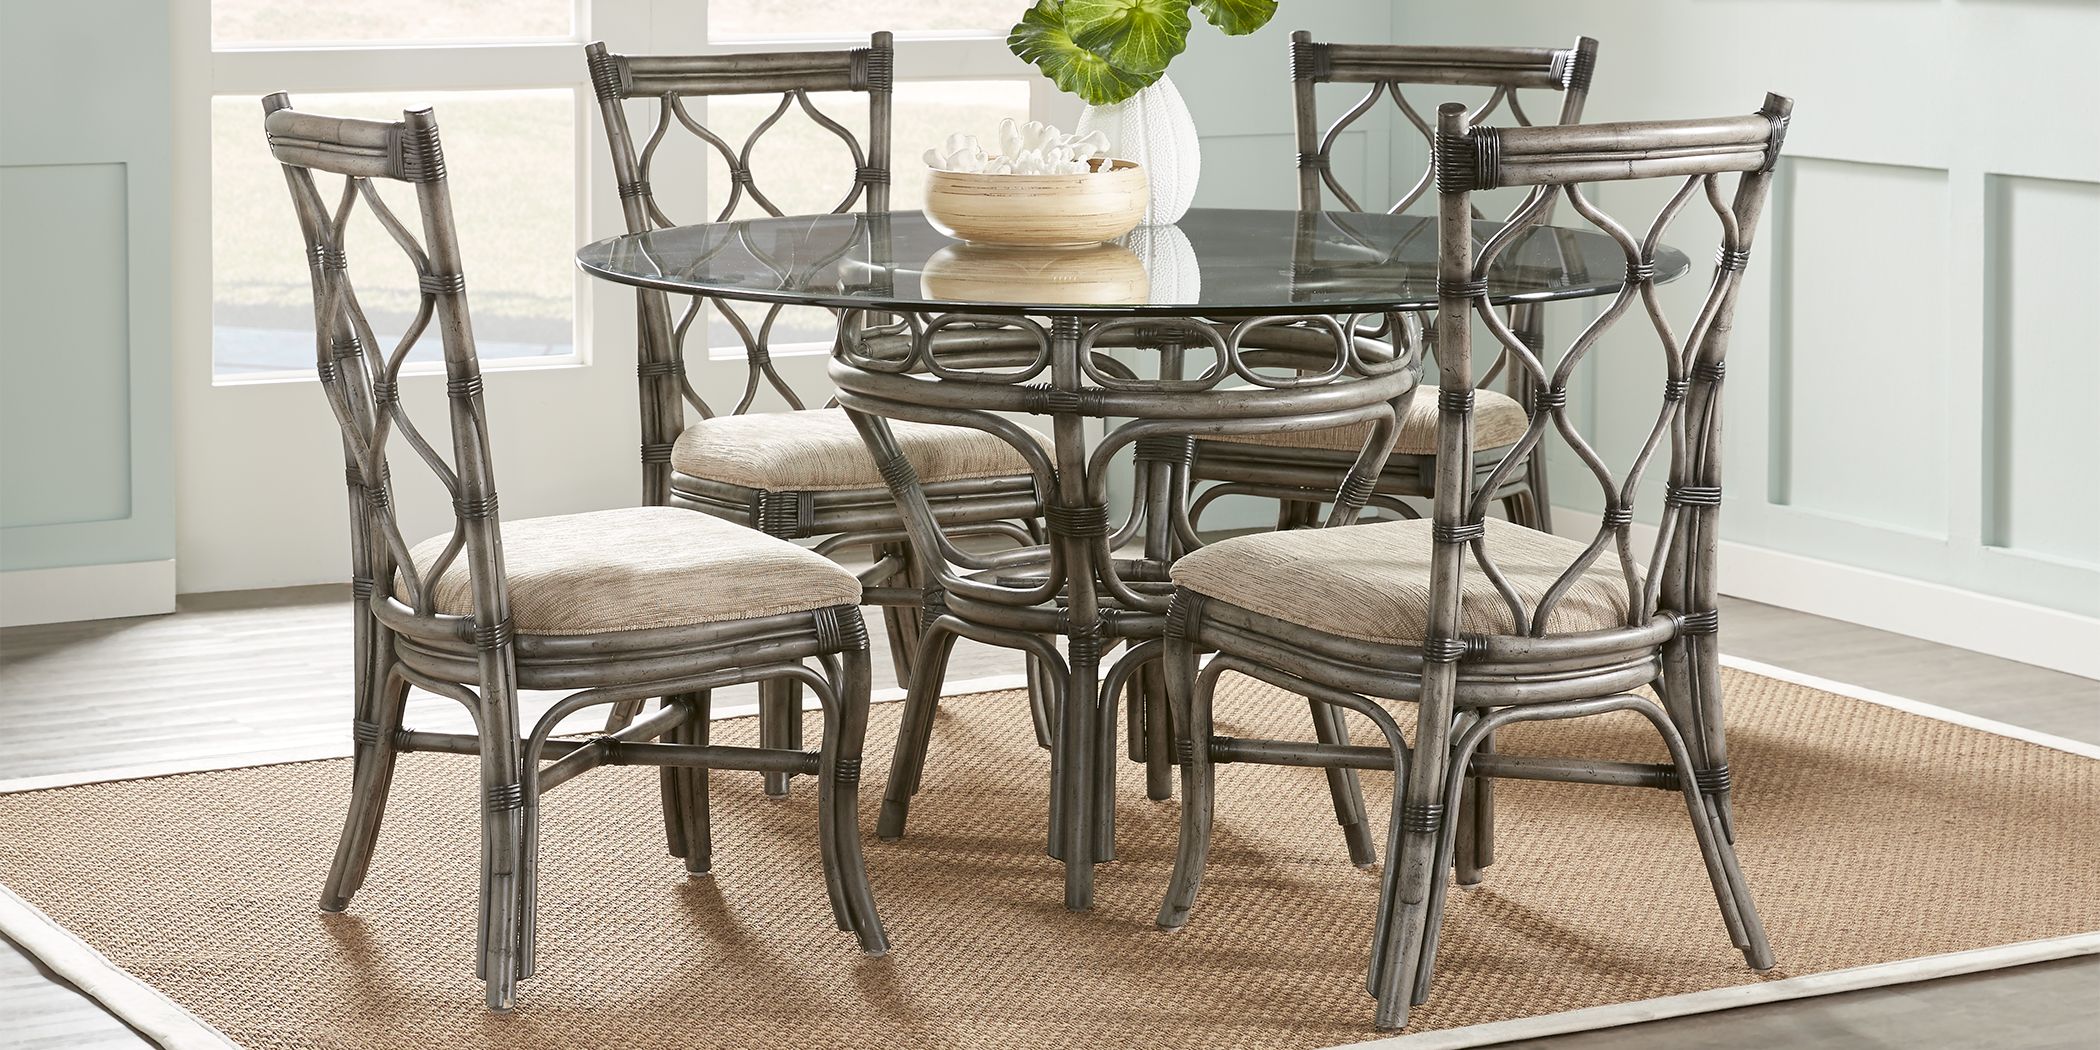 Dining Room Furniture Rooms, Rooms To Go Dining Room Sets